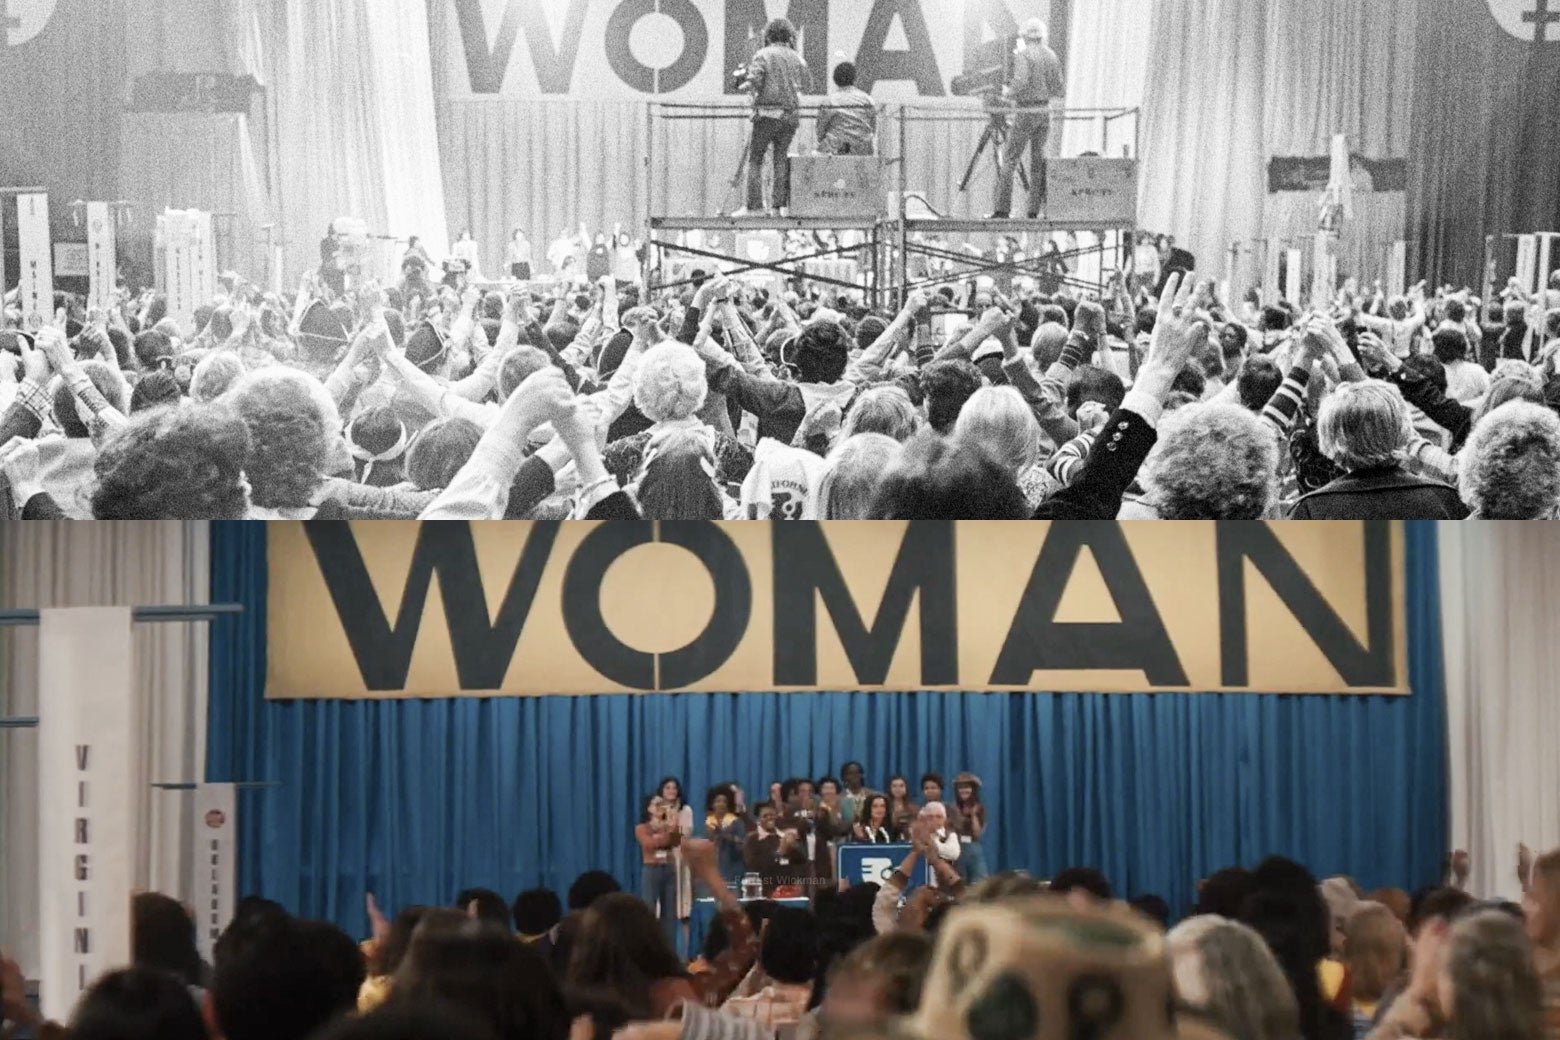 The two stages match each other to a T, with the big banner on the stage in both reading simply "Woman" in the same font.